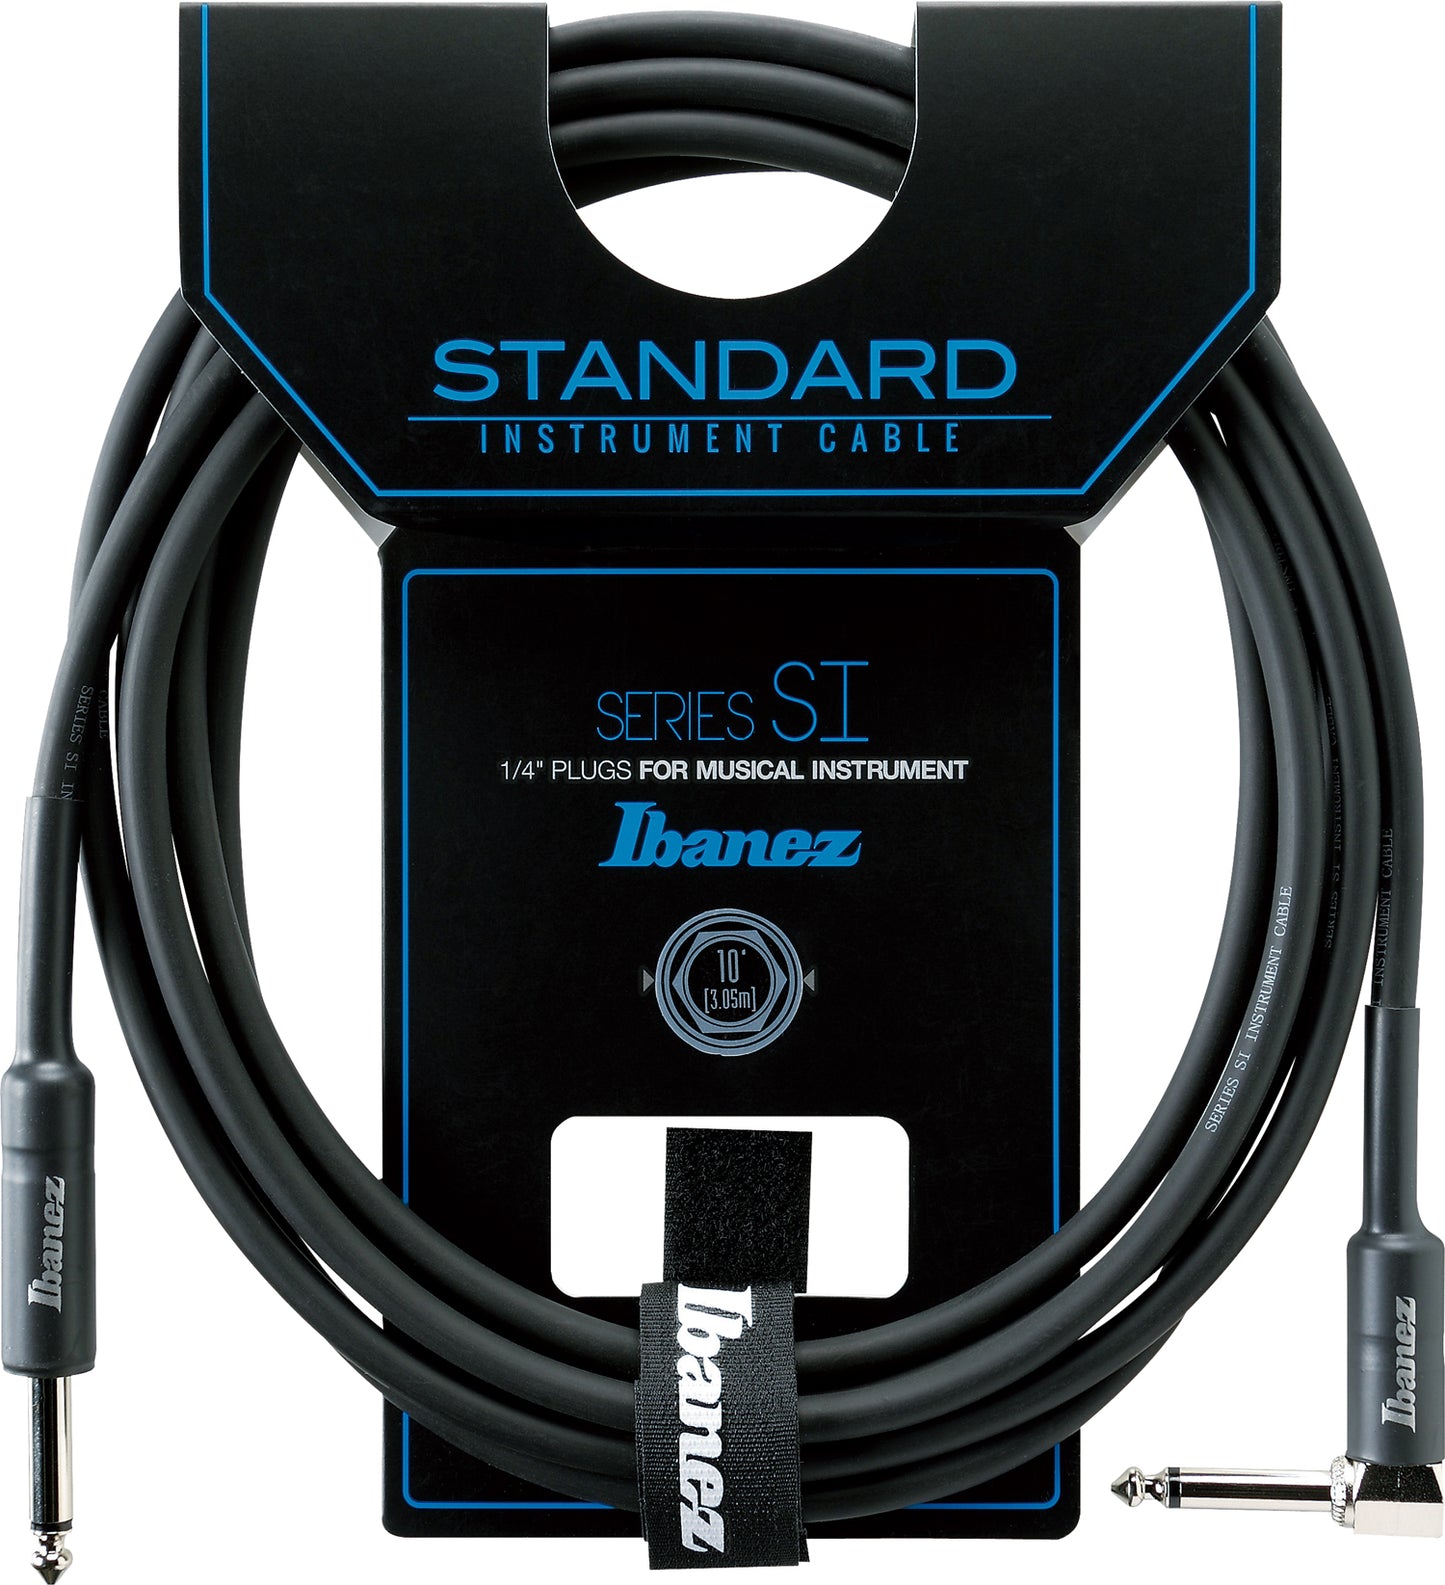 Ibanez Guitar Cable 10ft with Right Angle Plug